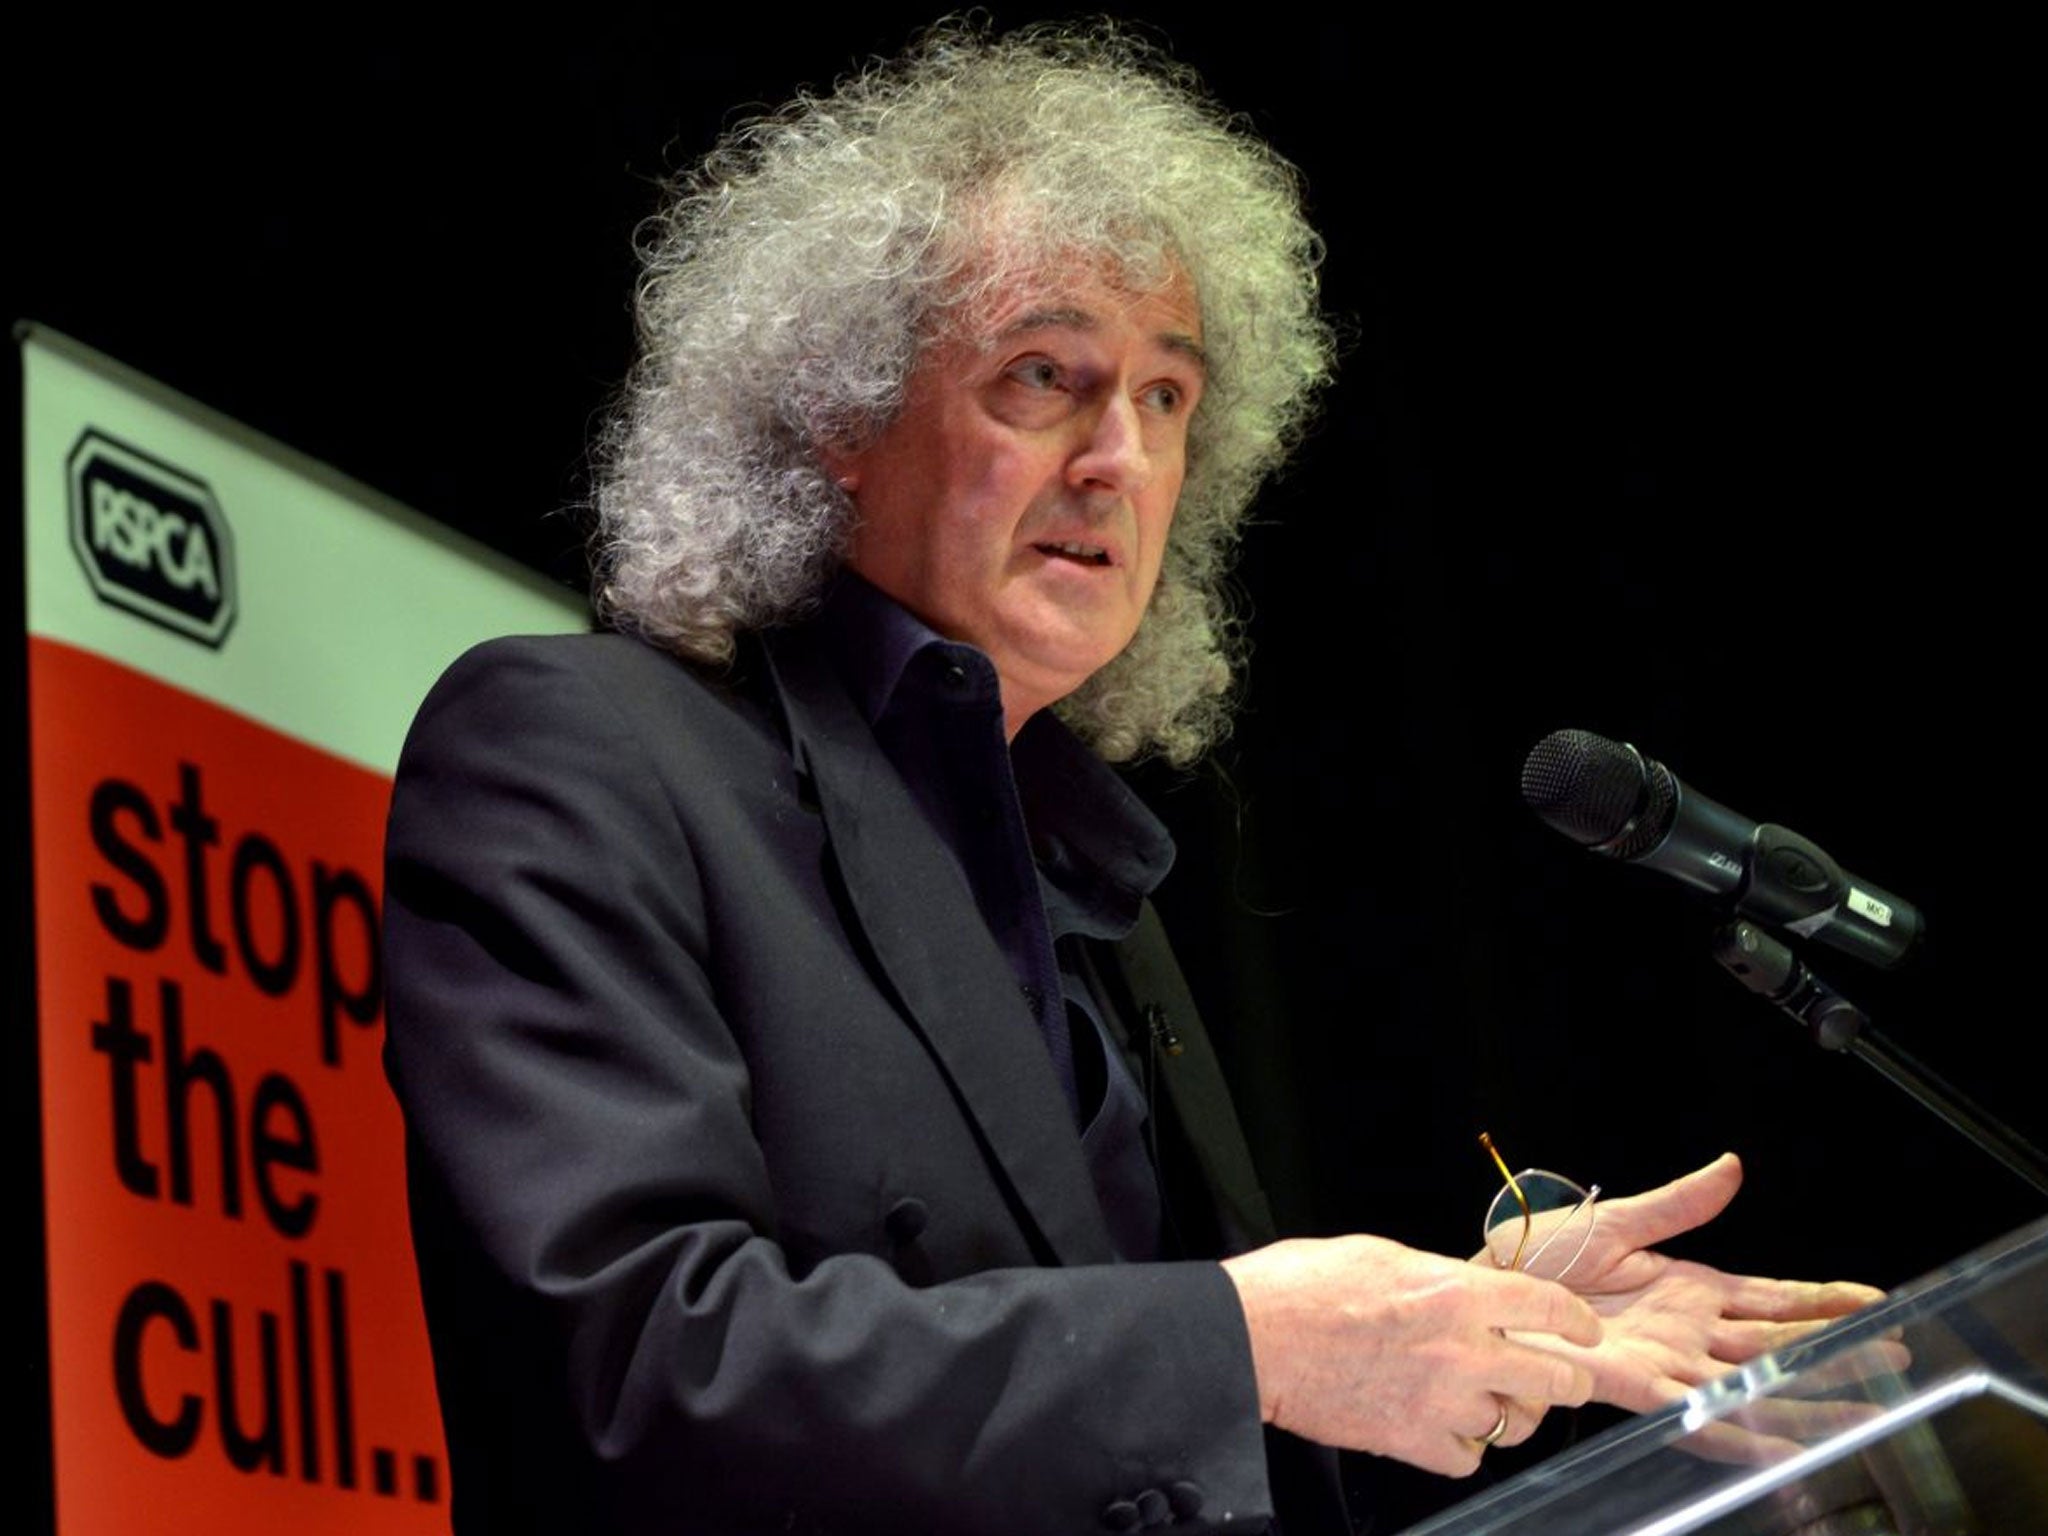 Brian May at the launch of the anti-cull campaign